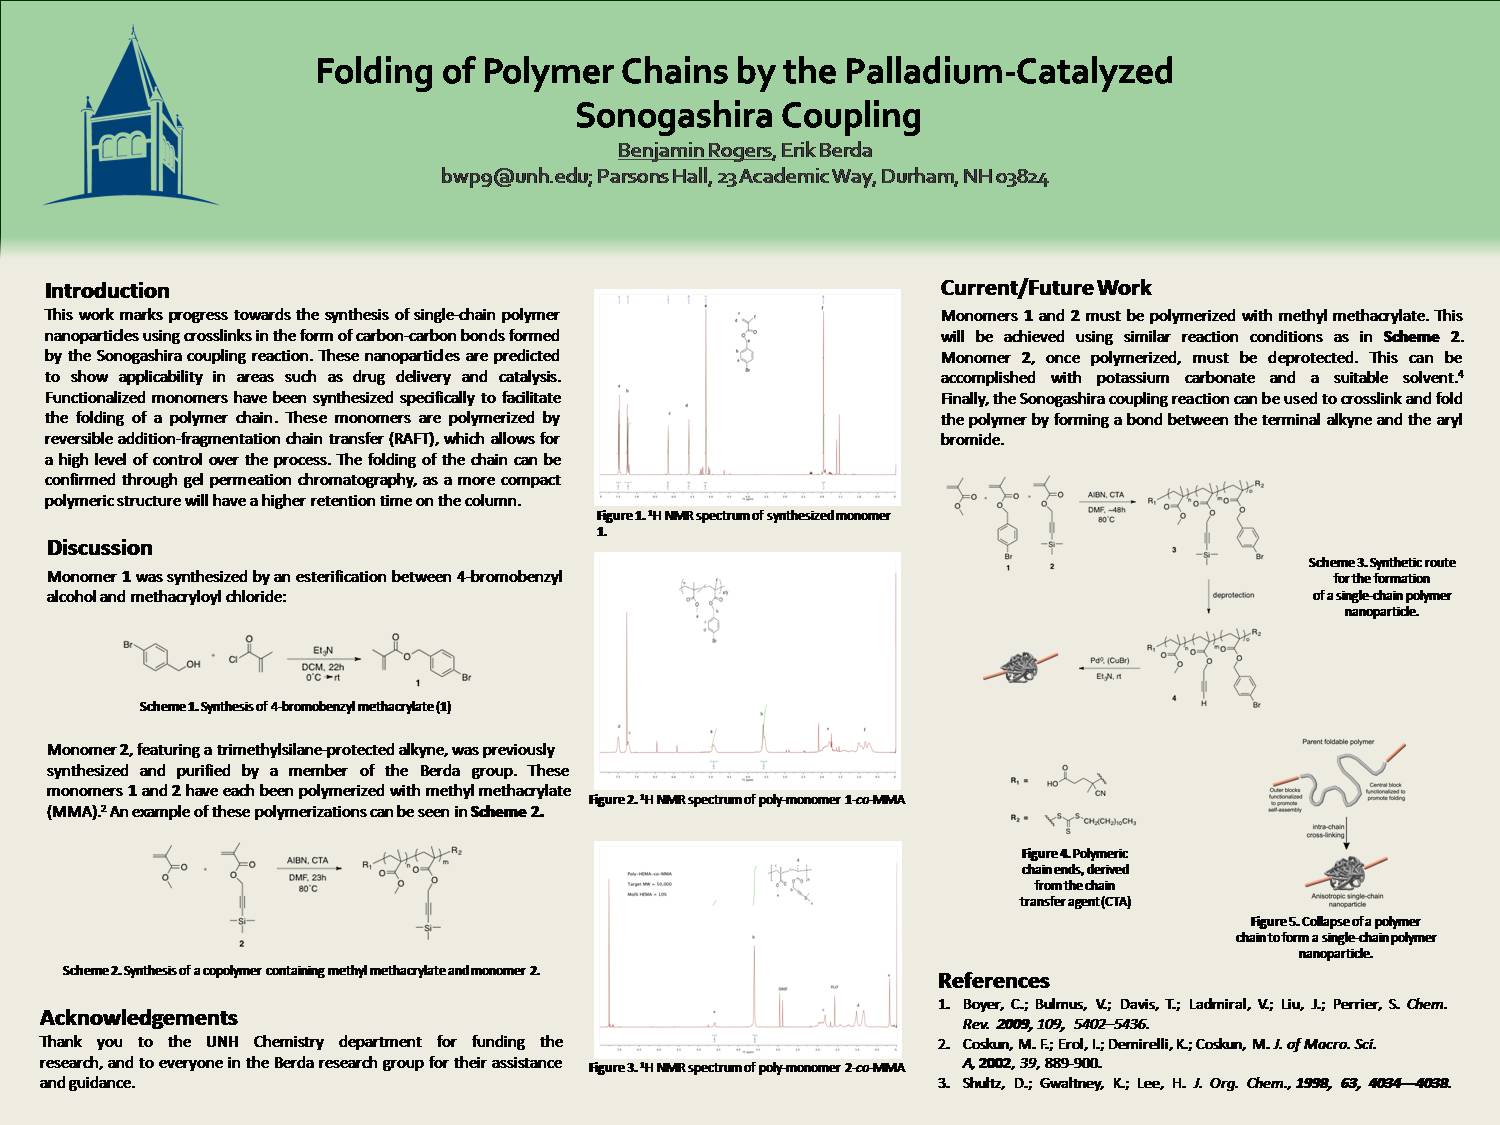 Folding Of Polymer Chains By The Palladium-Catalyzed Sonogashira Coupling by bwp9